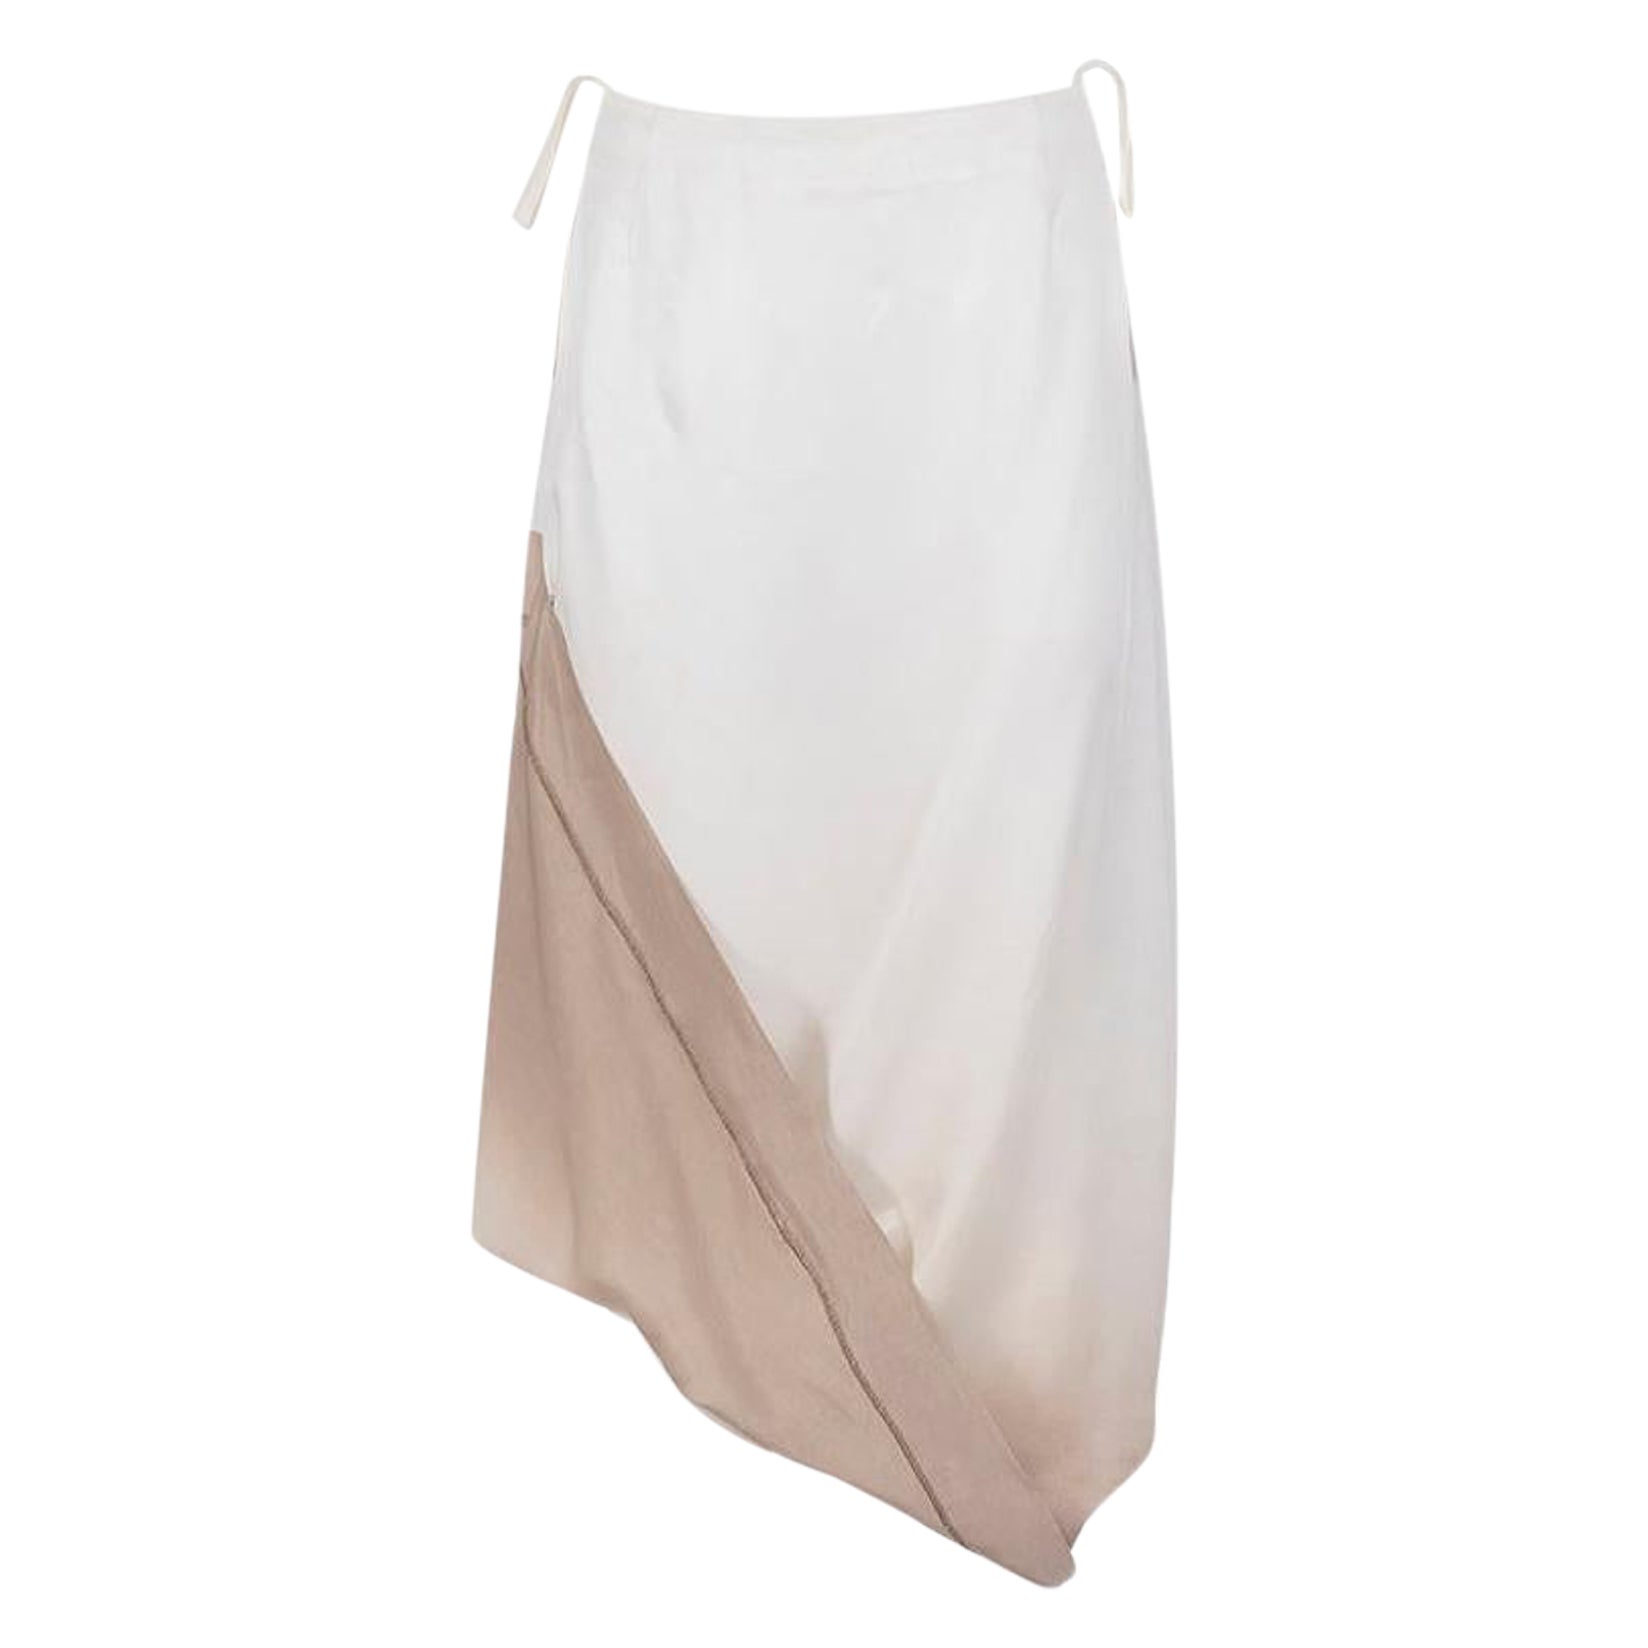 MAISON MARTIN MARGIELA SS 03 Iconic Shaded Hitched Up Skirt For Sale